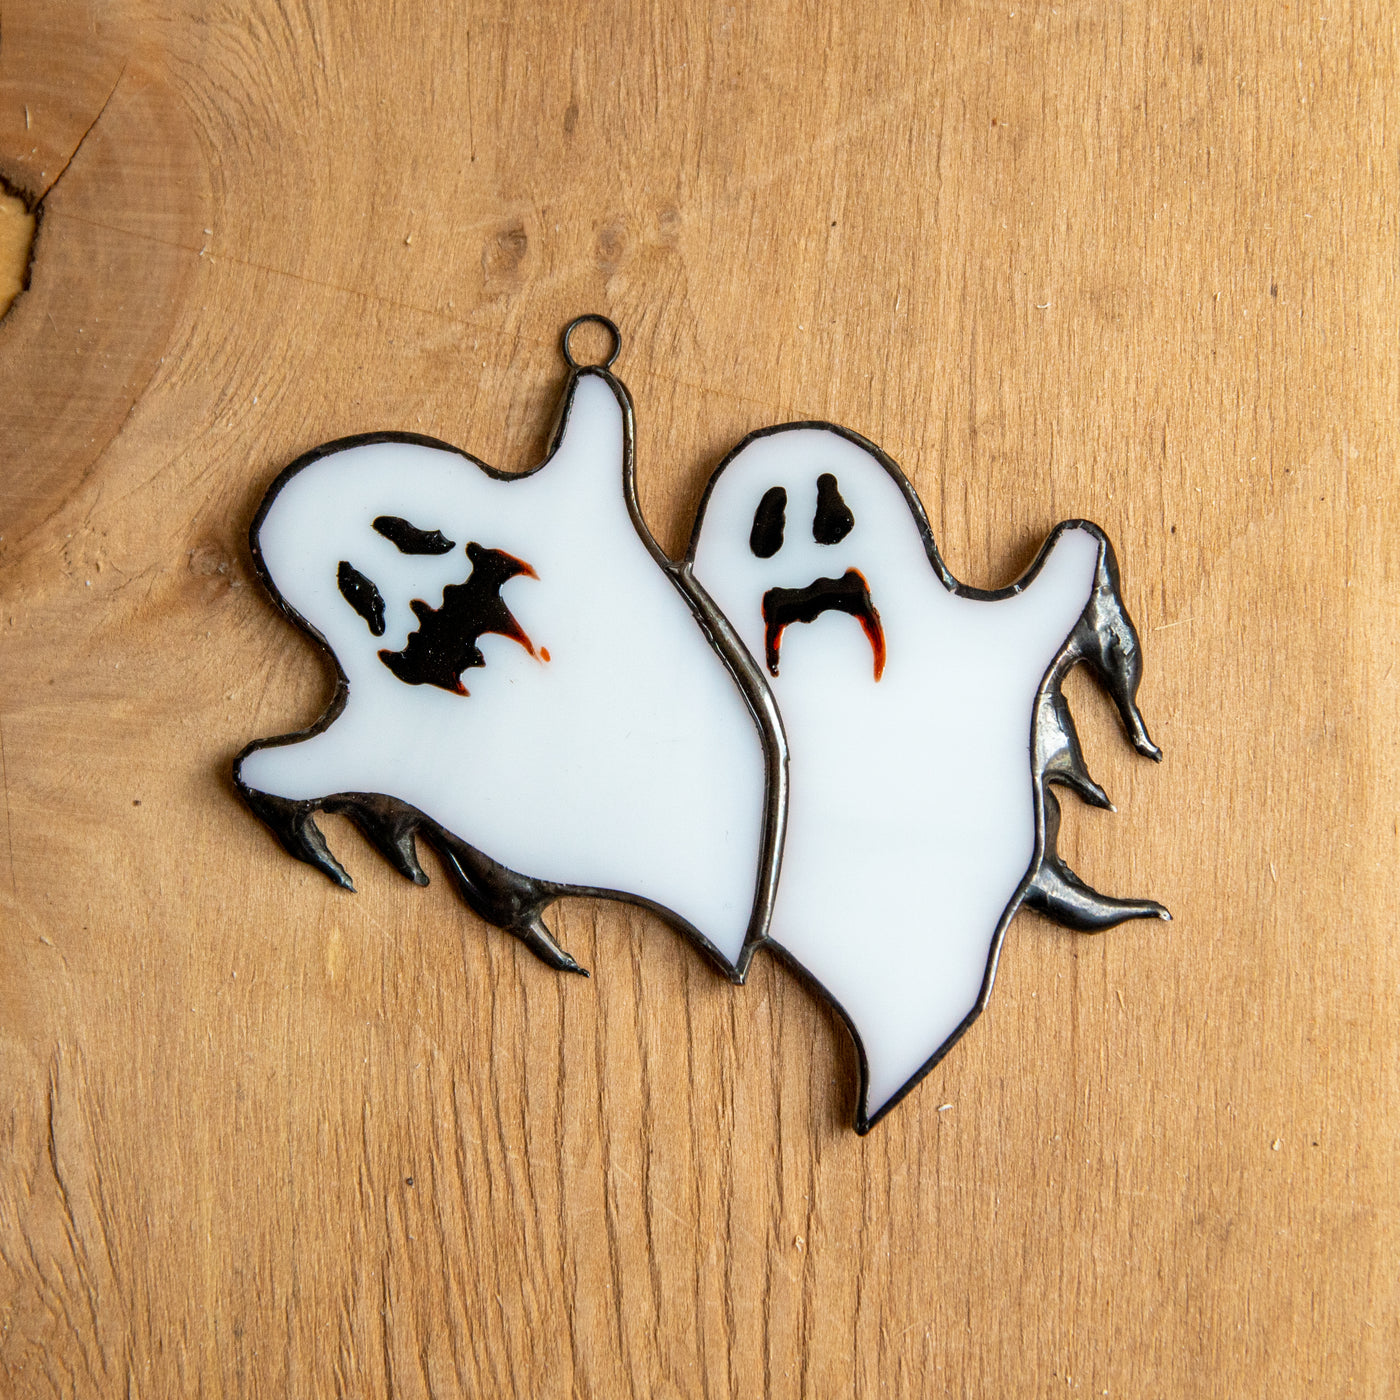 Stained glass suncatcher of ghastly ghosts for Halloween